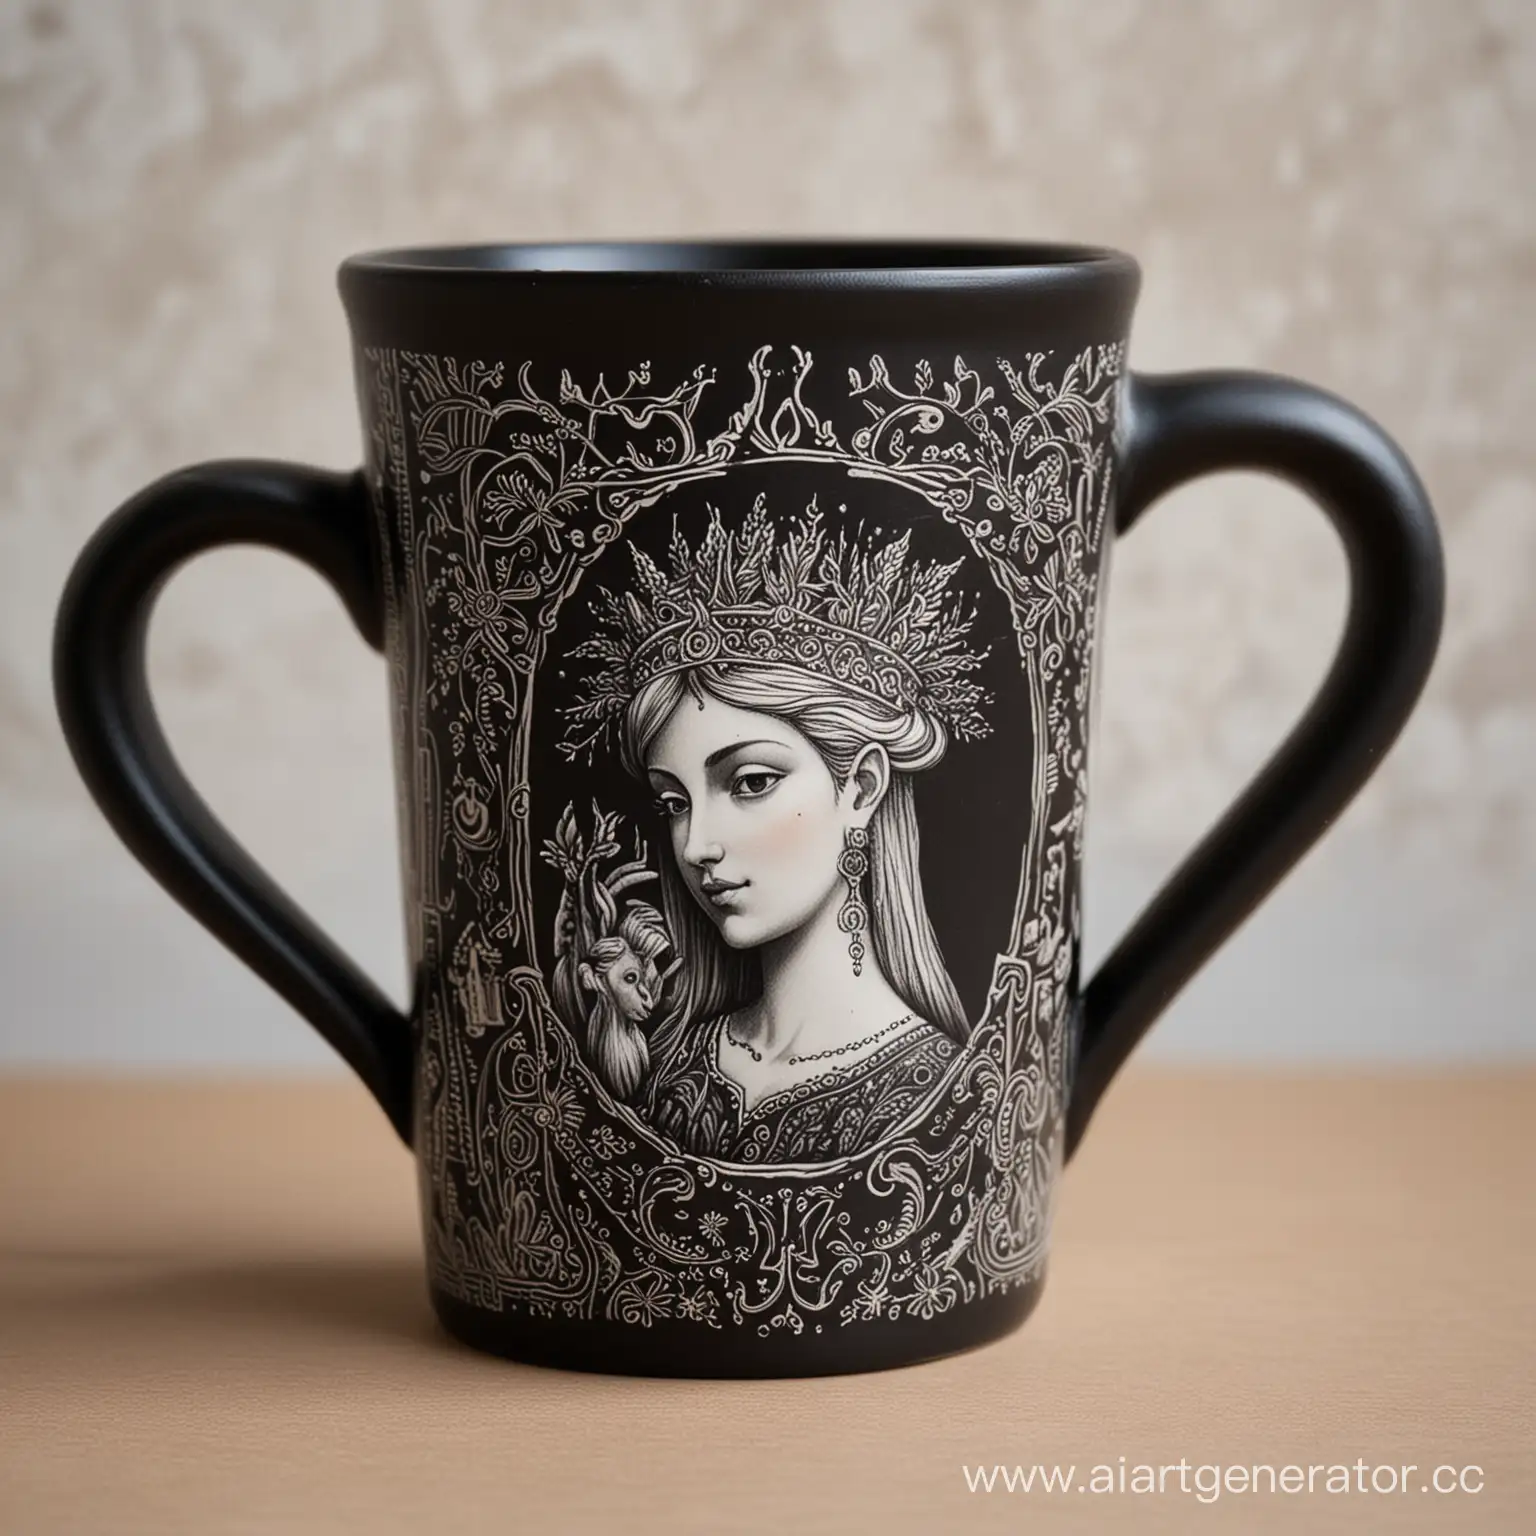 Black-Clay-Alkonost-Mug-Fairytale-Motifs-and-Schematic-Painting